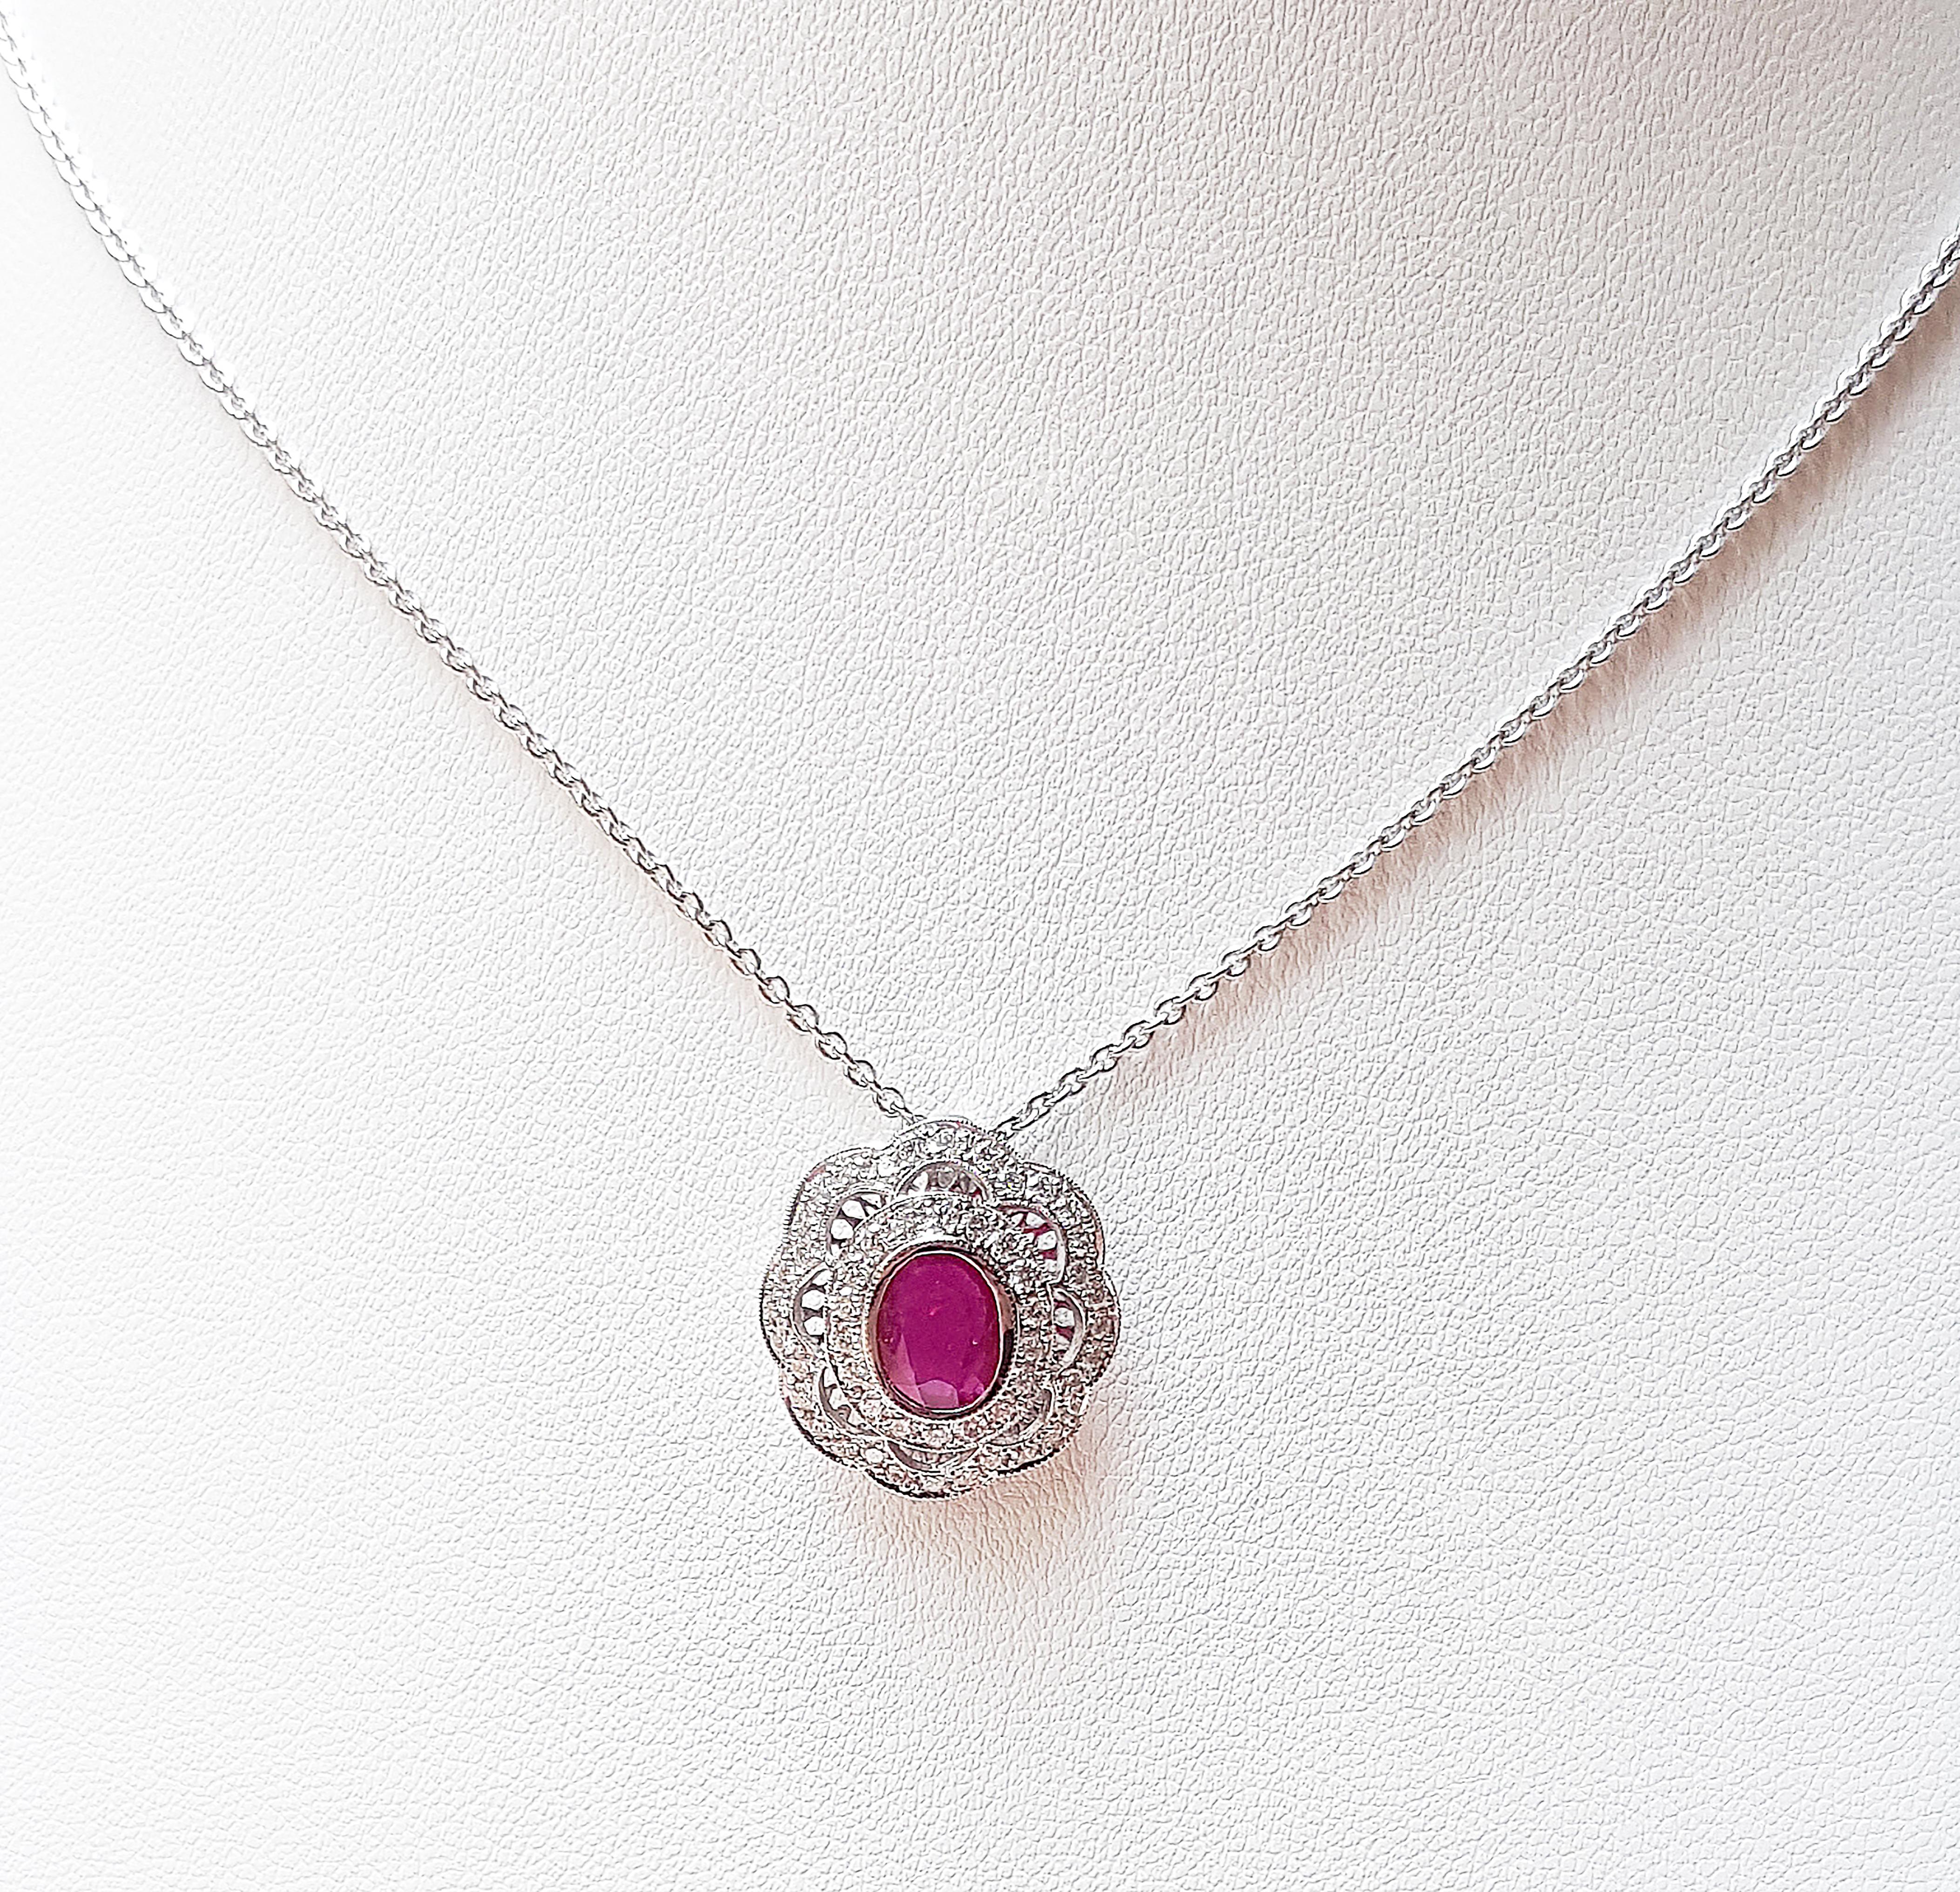 Ruby 1.0 carat with Diamond 0.59 carat Pendant set in 18 Karat White Gold Settings
(chain not included)

Width:  1.8 cm 
Length: 1.9 cm
Total Weight: 2.74 grams

